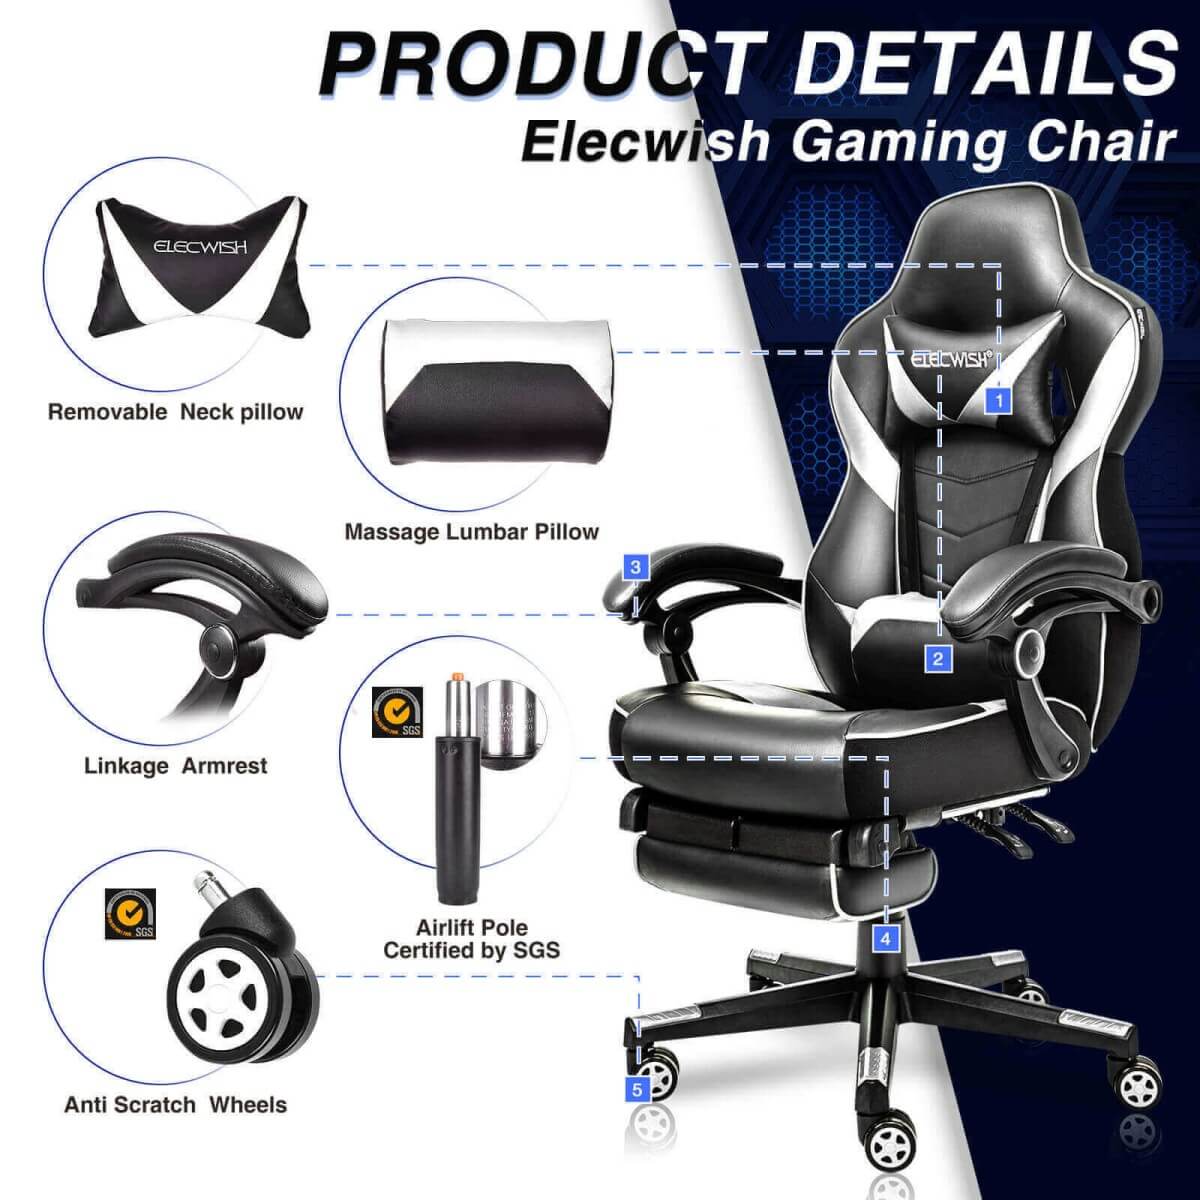 Elecwish Video Game Chairs White Gaming Chair With Footrest OC087 details